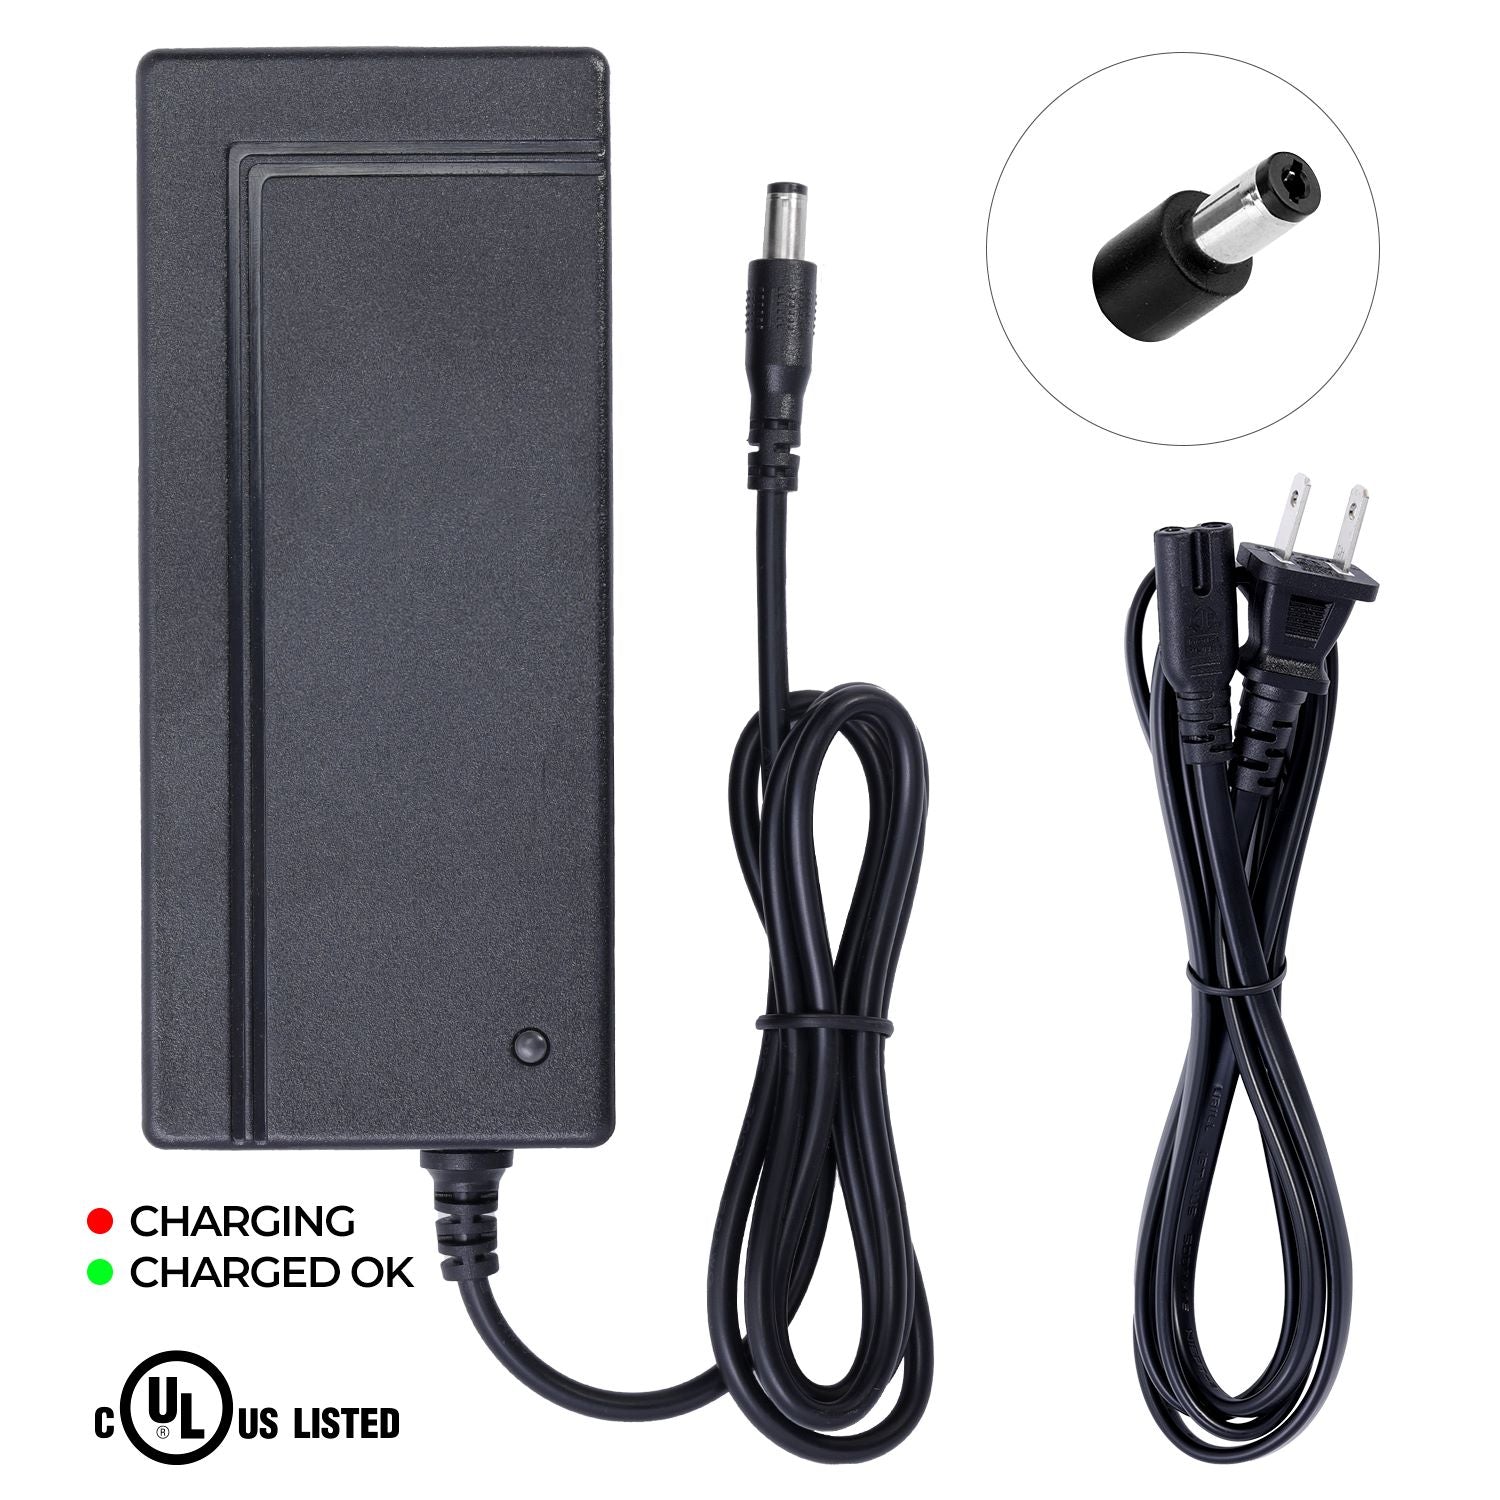 UL Listed Charger for Swagtron EB7 eBike